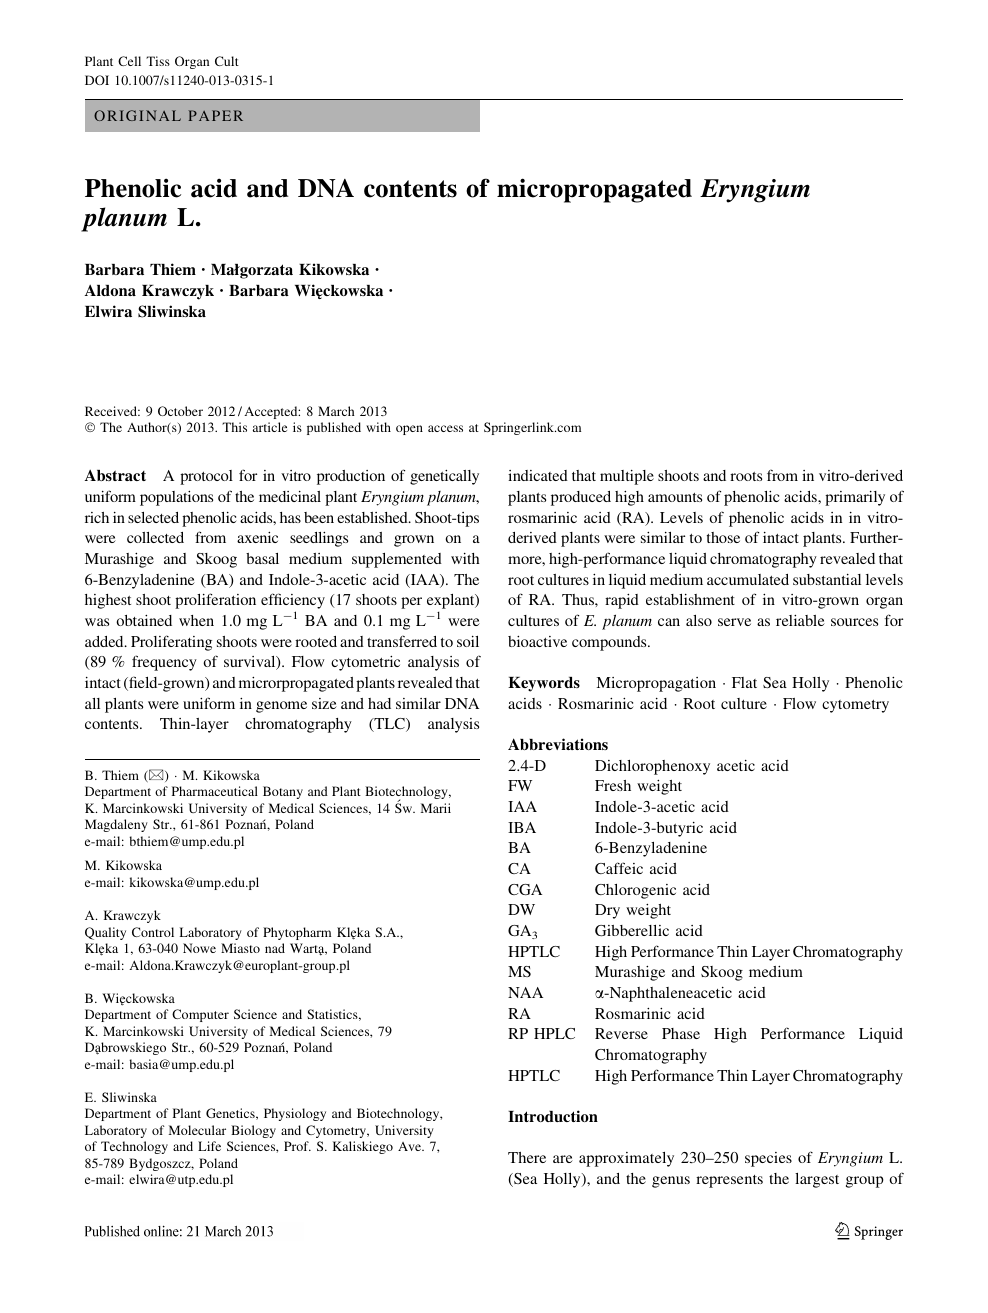 Phenolic Acid And Dna Contents Of Micropropagated Eryngium Planum L Topic Of Research Paper In Biological Sciences Download Scholarly Article Pdf And Read For Free On Cyberleninka Open Science Hub